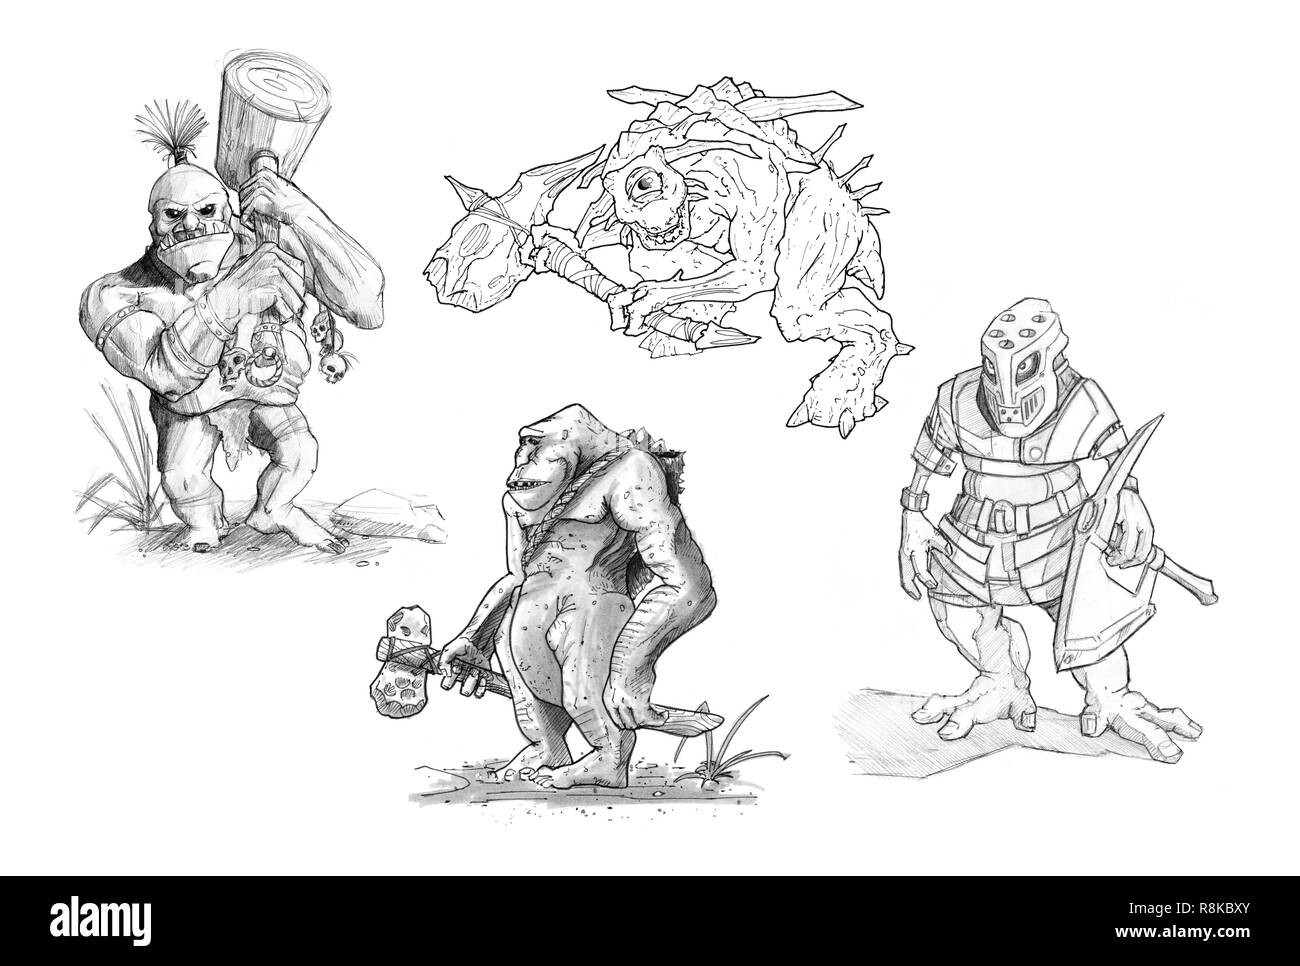 Set of Pencil or Ink Drawings of Various Fantasy Monsters Stock Photo